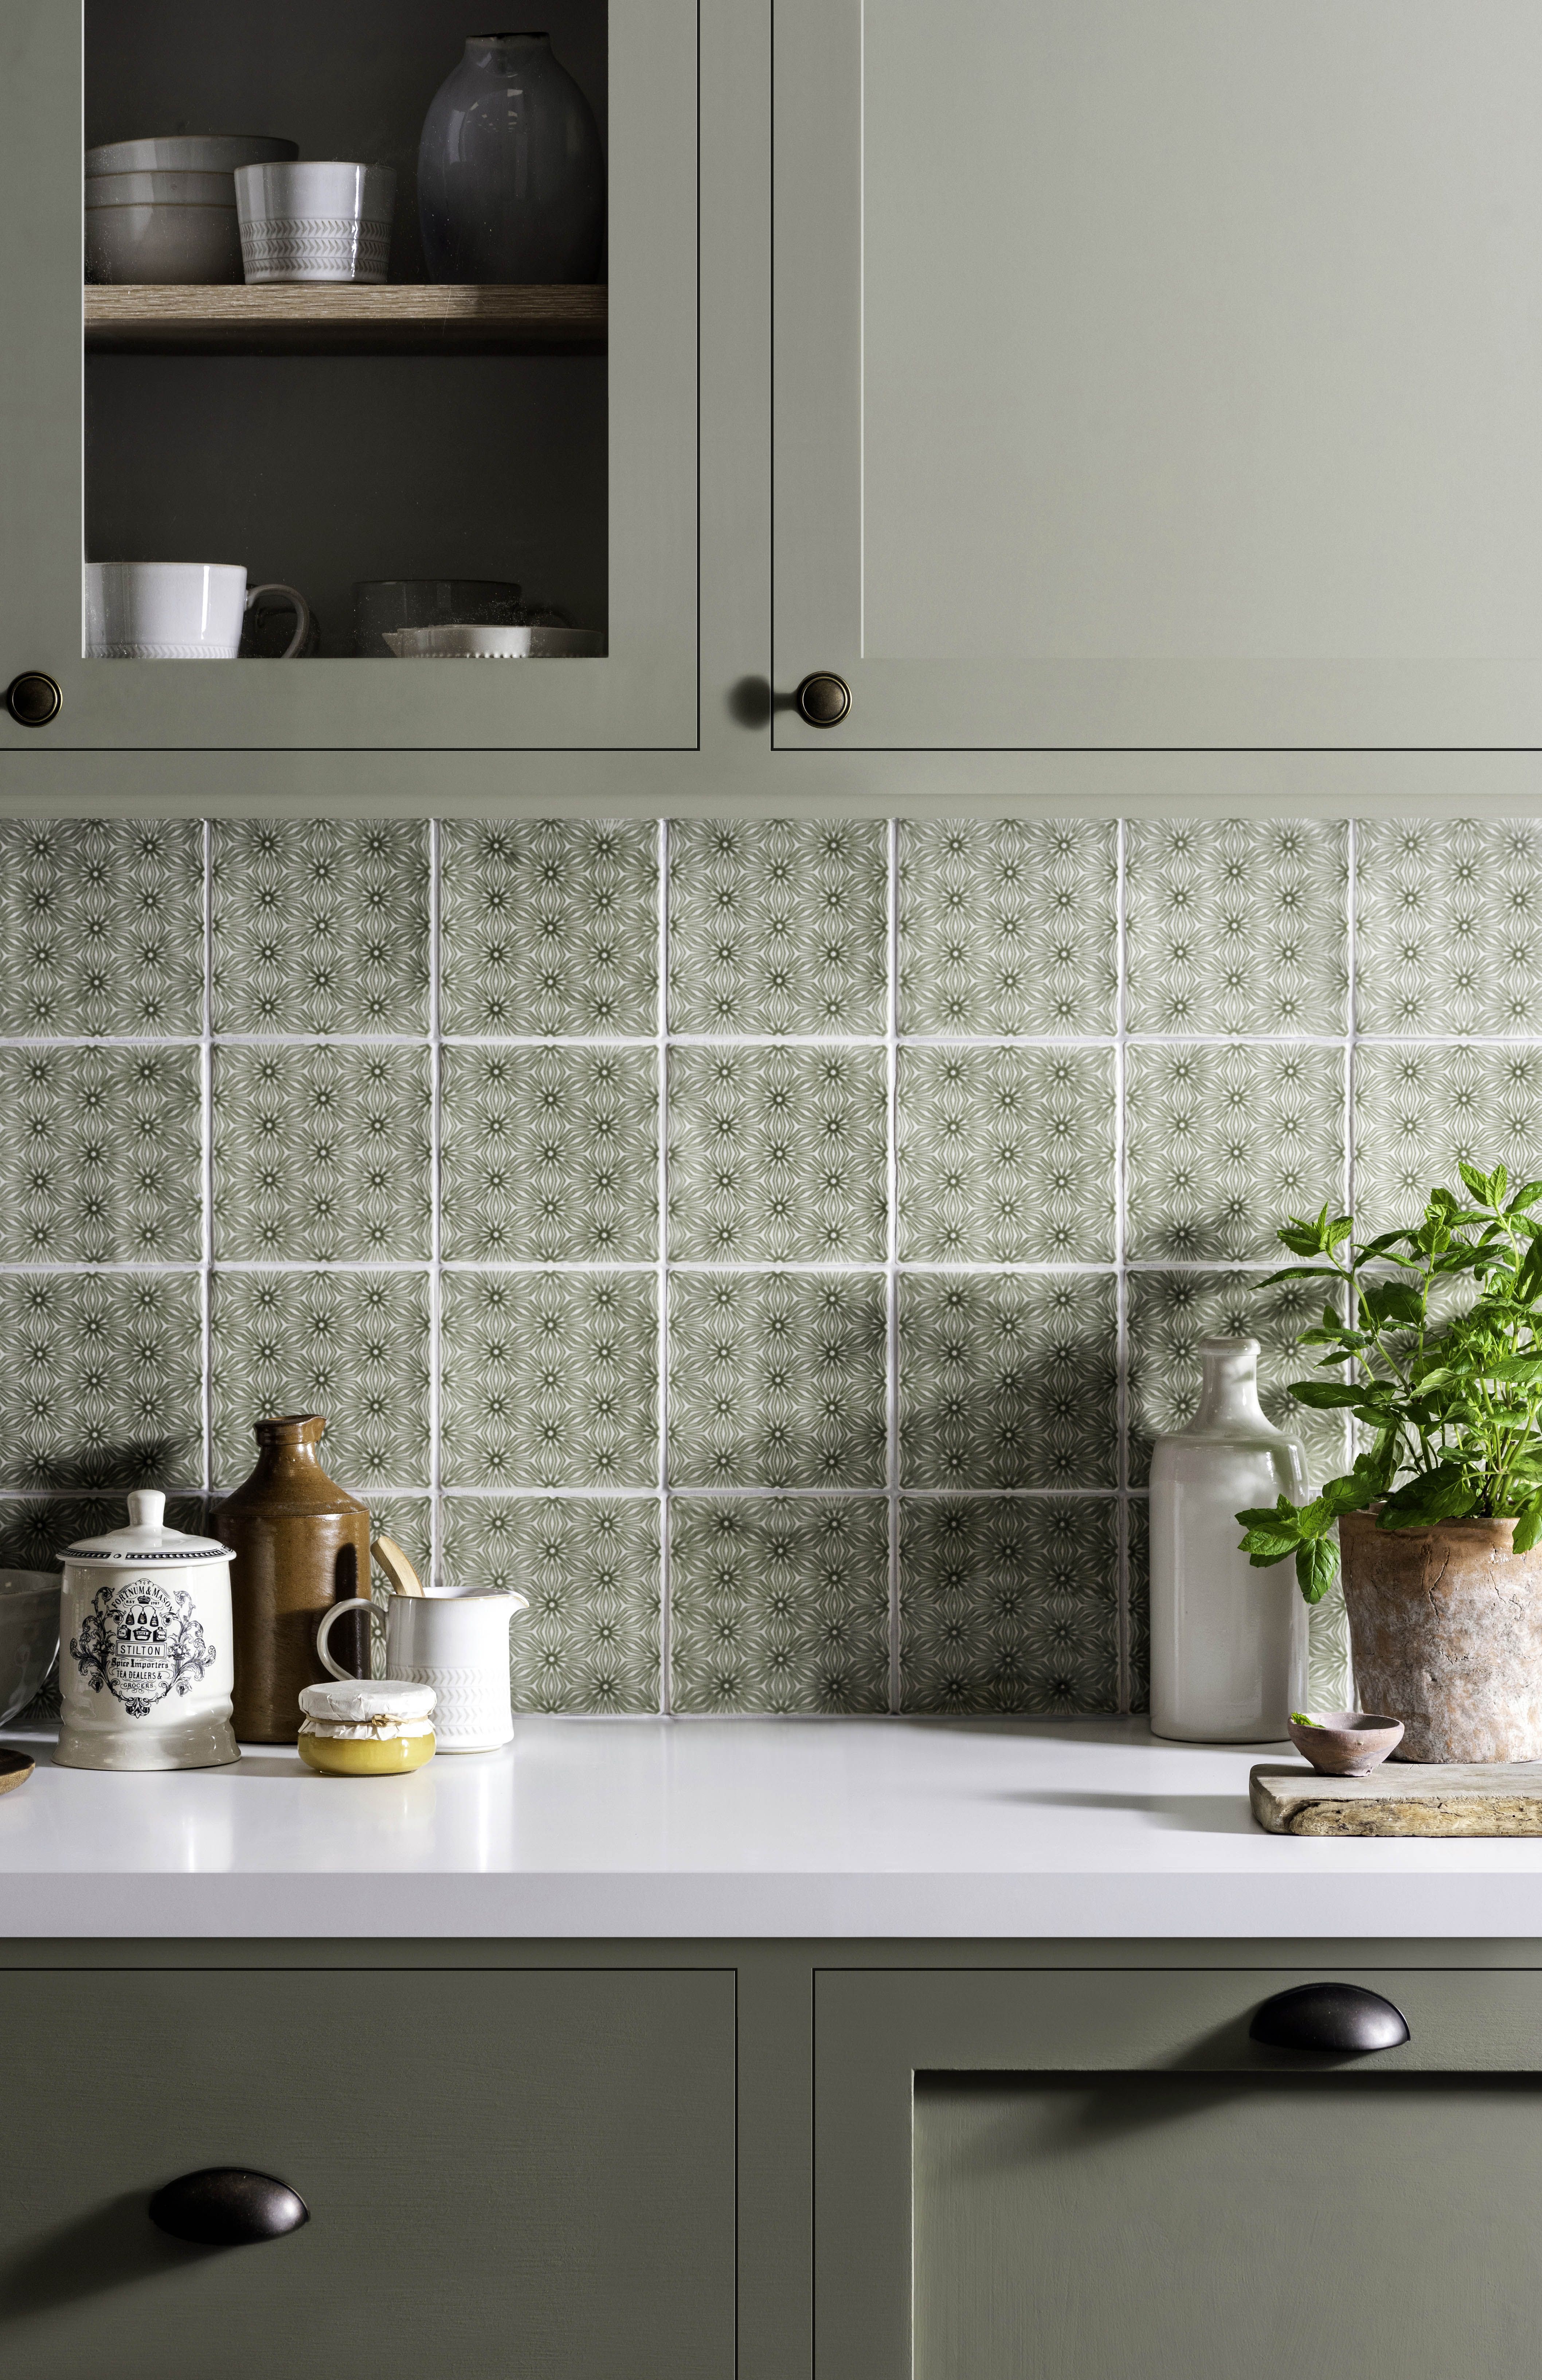 18 kitchen tile ideas fit for a country home